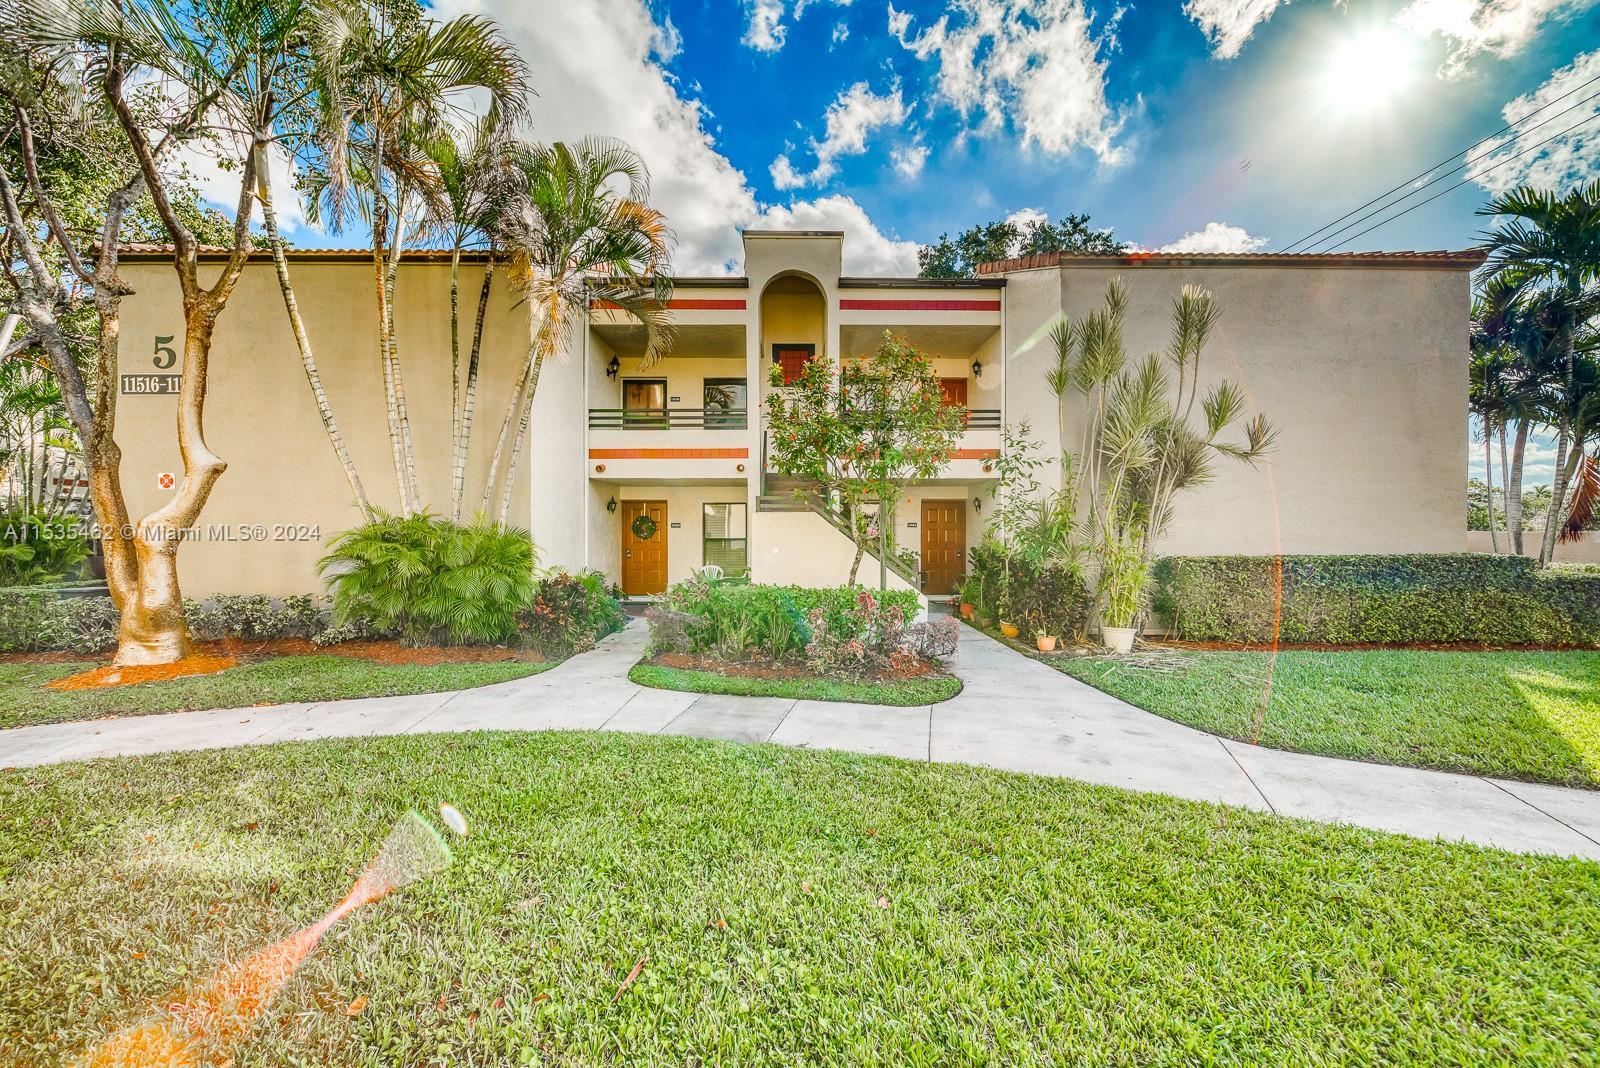 Photo of 11530 NW 10th St #11530 in Pembroke Pines, FL